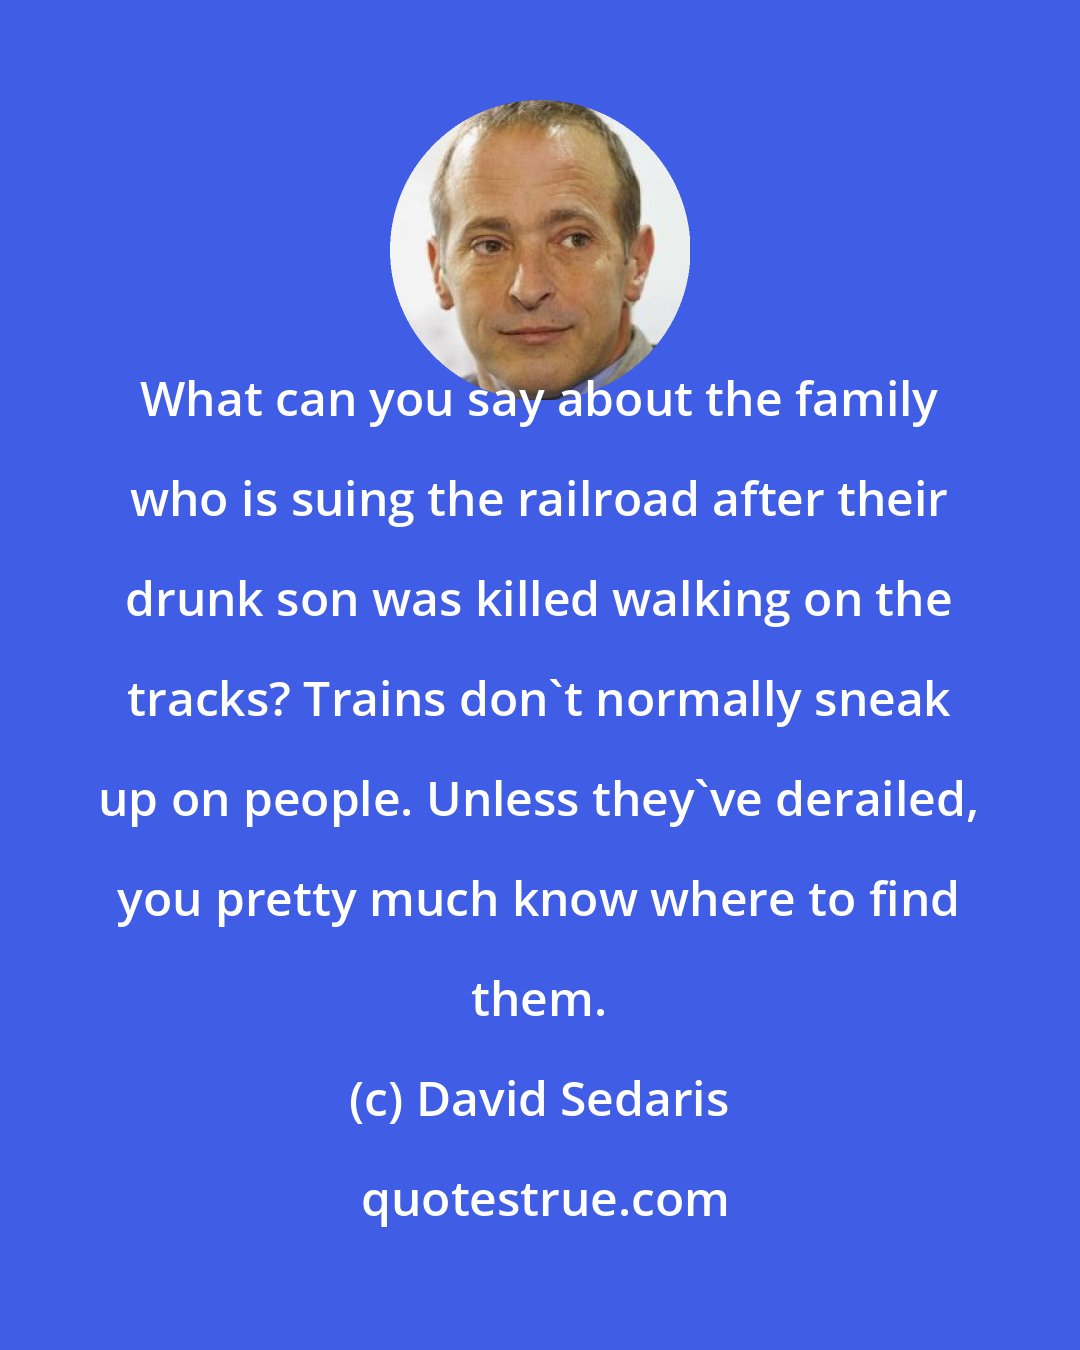 David Sedaris: What can you say about the family who is suing the railroad after their drunk son was killed walking on the tracks? Trains don't normally sneak up on people. Unless they've derailed, you pretty much know where to find them.